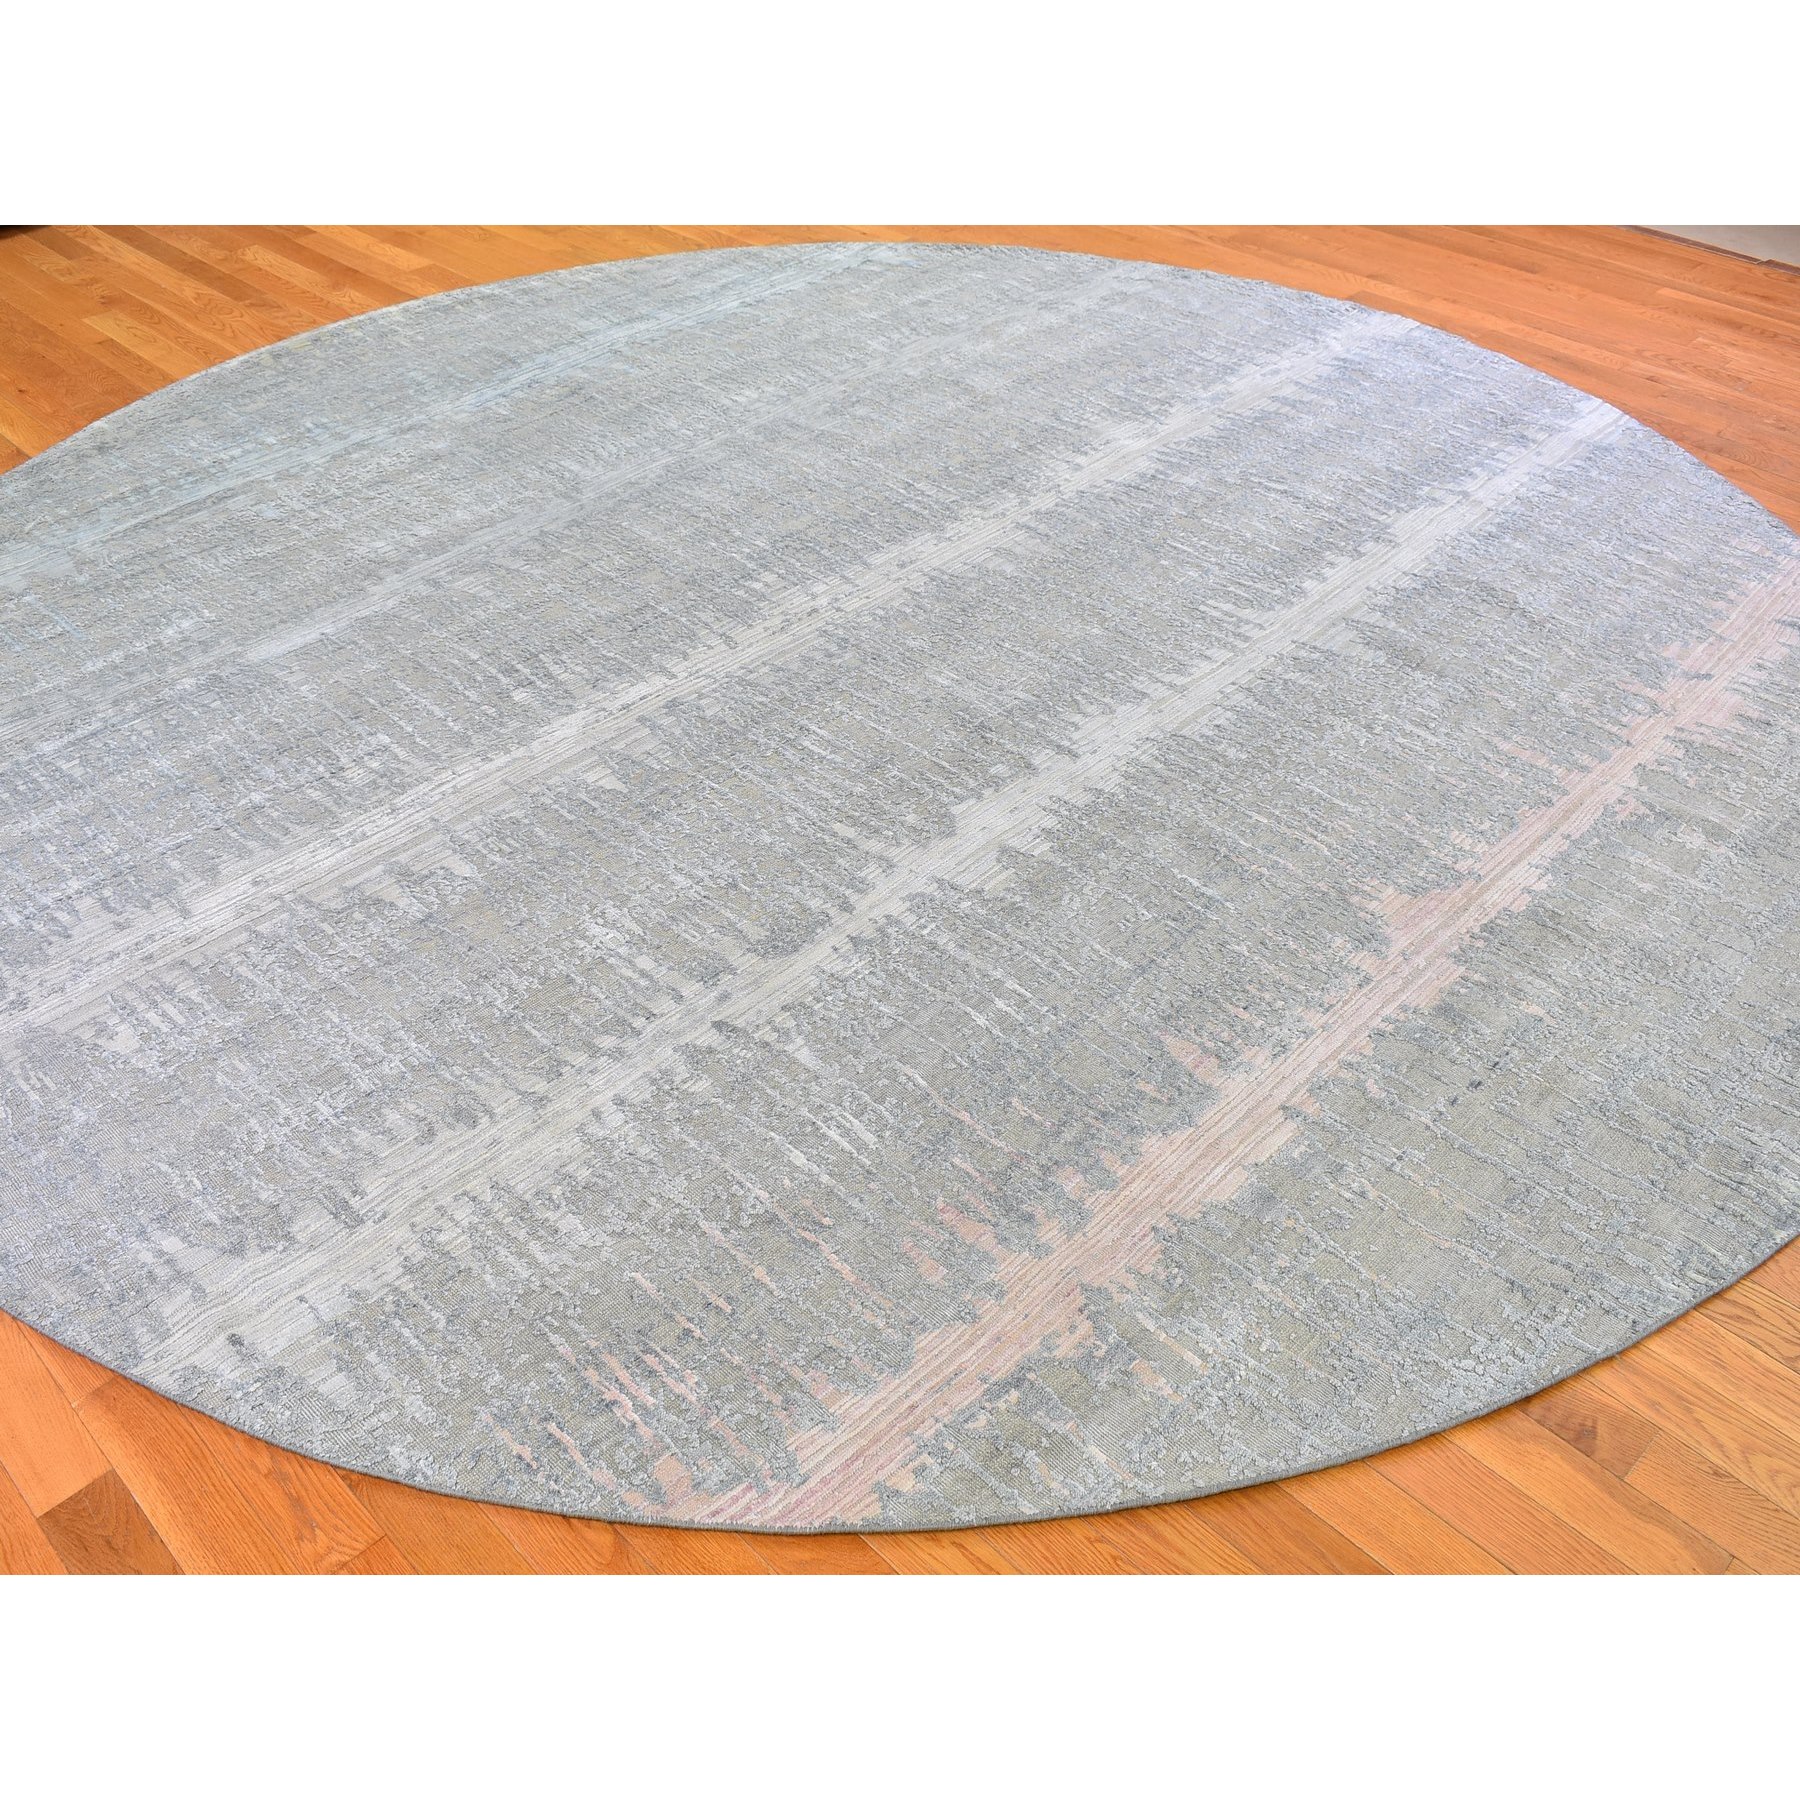 12'x12' Cardiac Design with Pastel Colors Round Textured Wool and Pure Silk Hand Woven Oriental Rug 